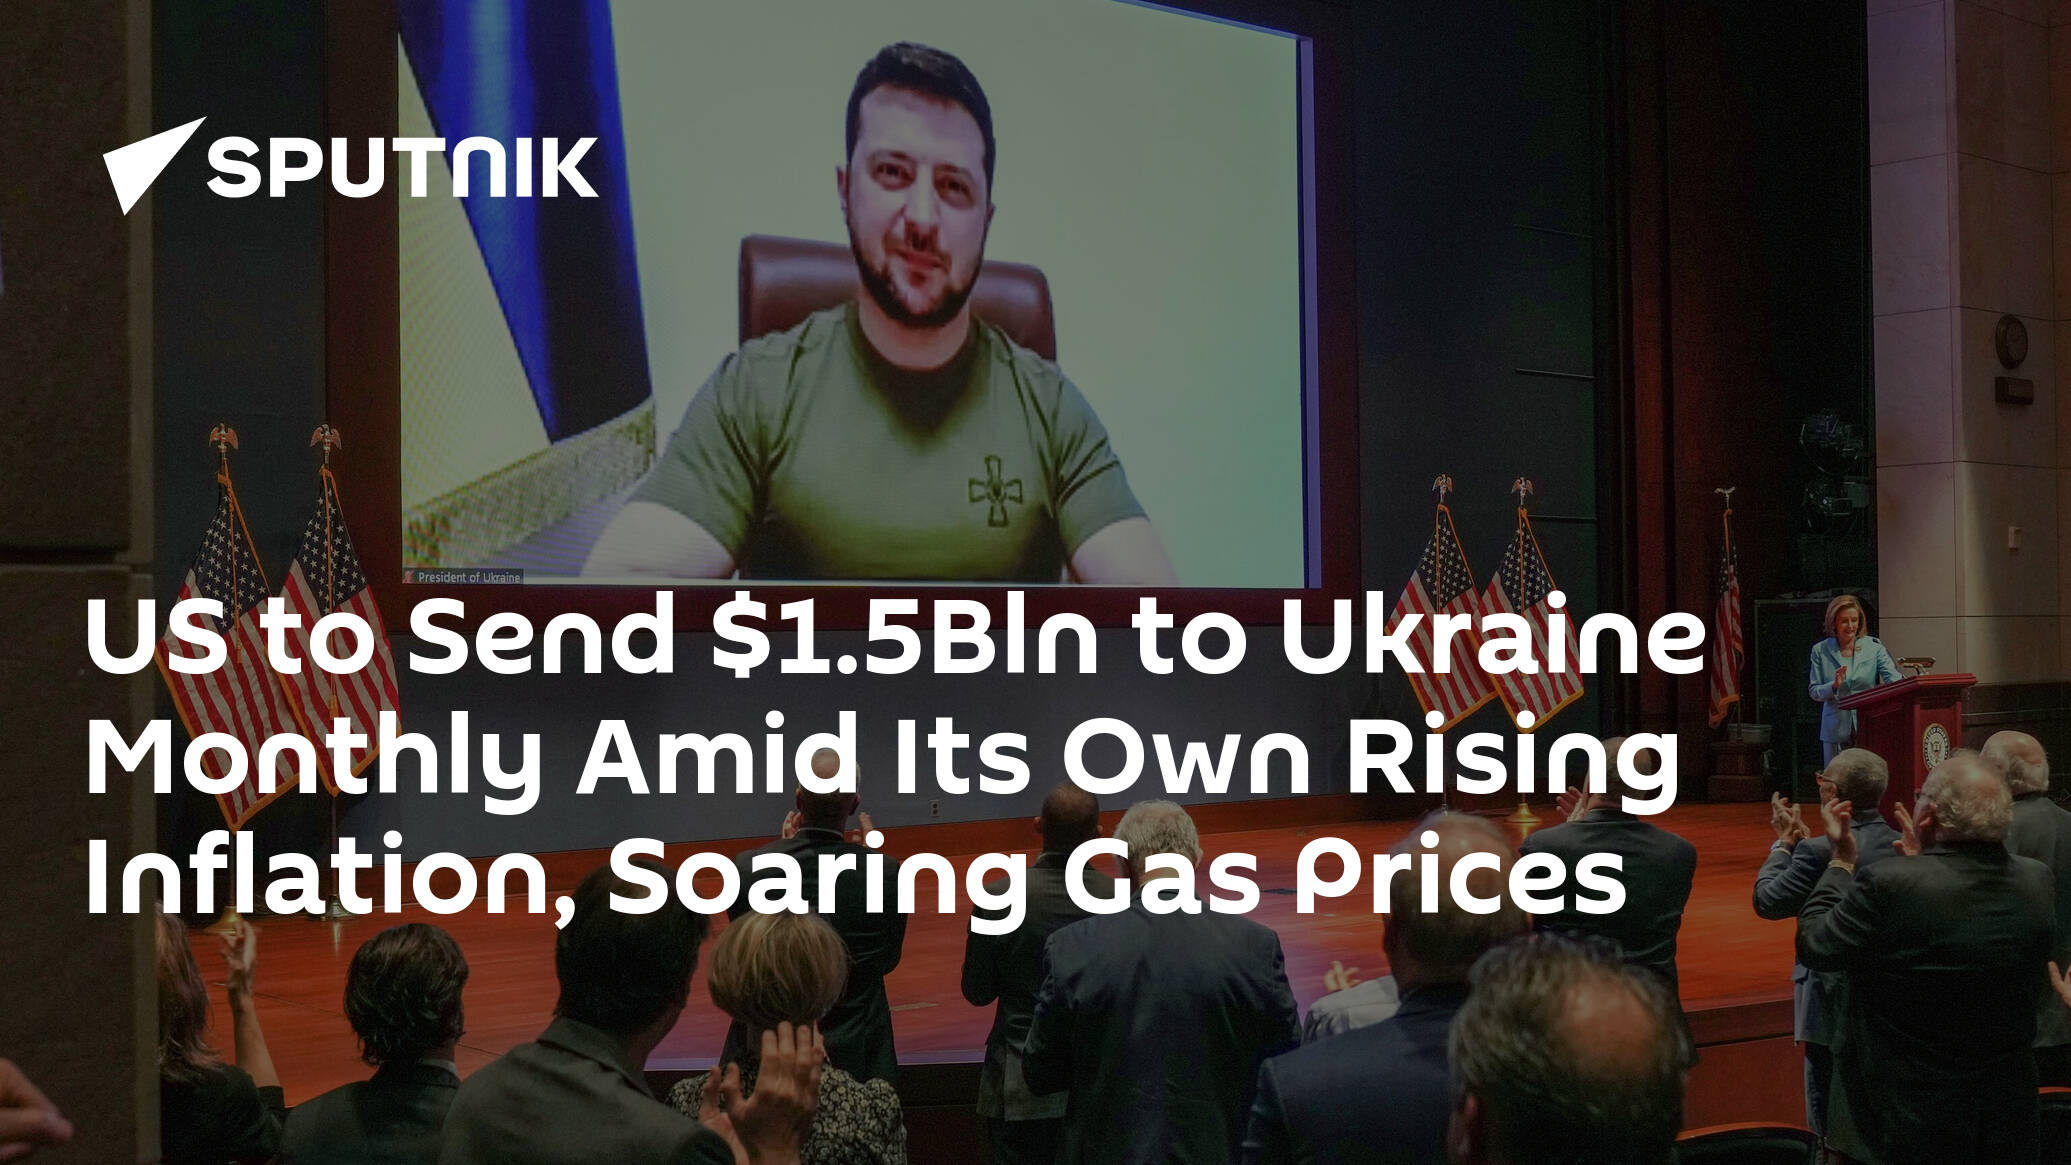 US to Send $1.5Bln to Ukraine Monthly Amid Its Own Rising Inflation, Soaring Gas Prices